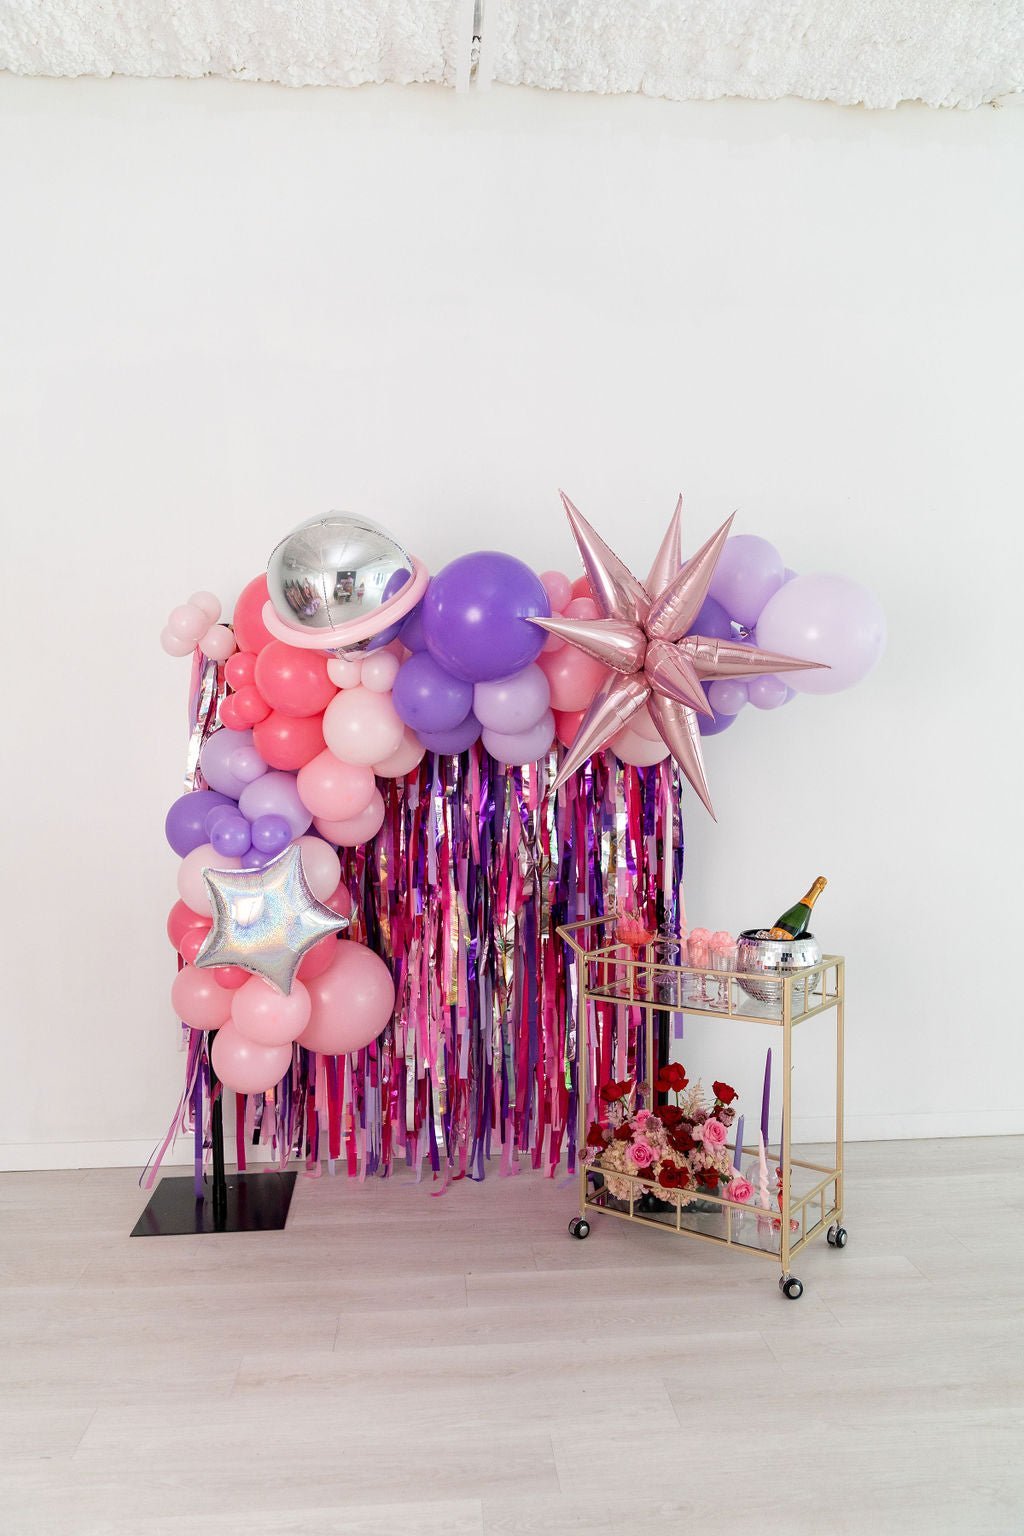 Ready To Ship: Euphoria Fringe Backdrop - Oh My Darling Party Co-bachelorette partybirthday partychristmas 22 #Fringe_Backdrop#